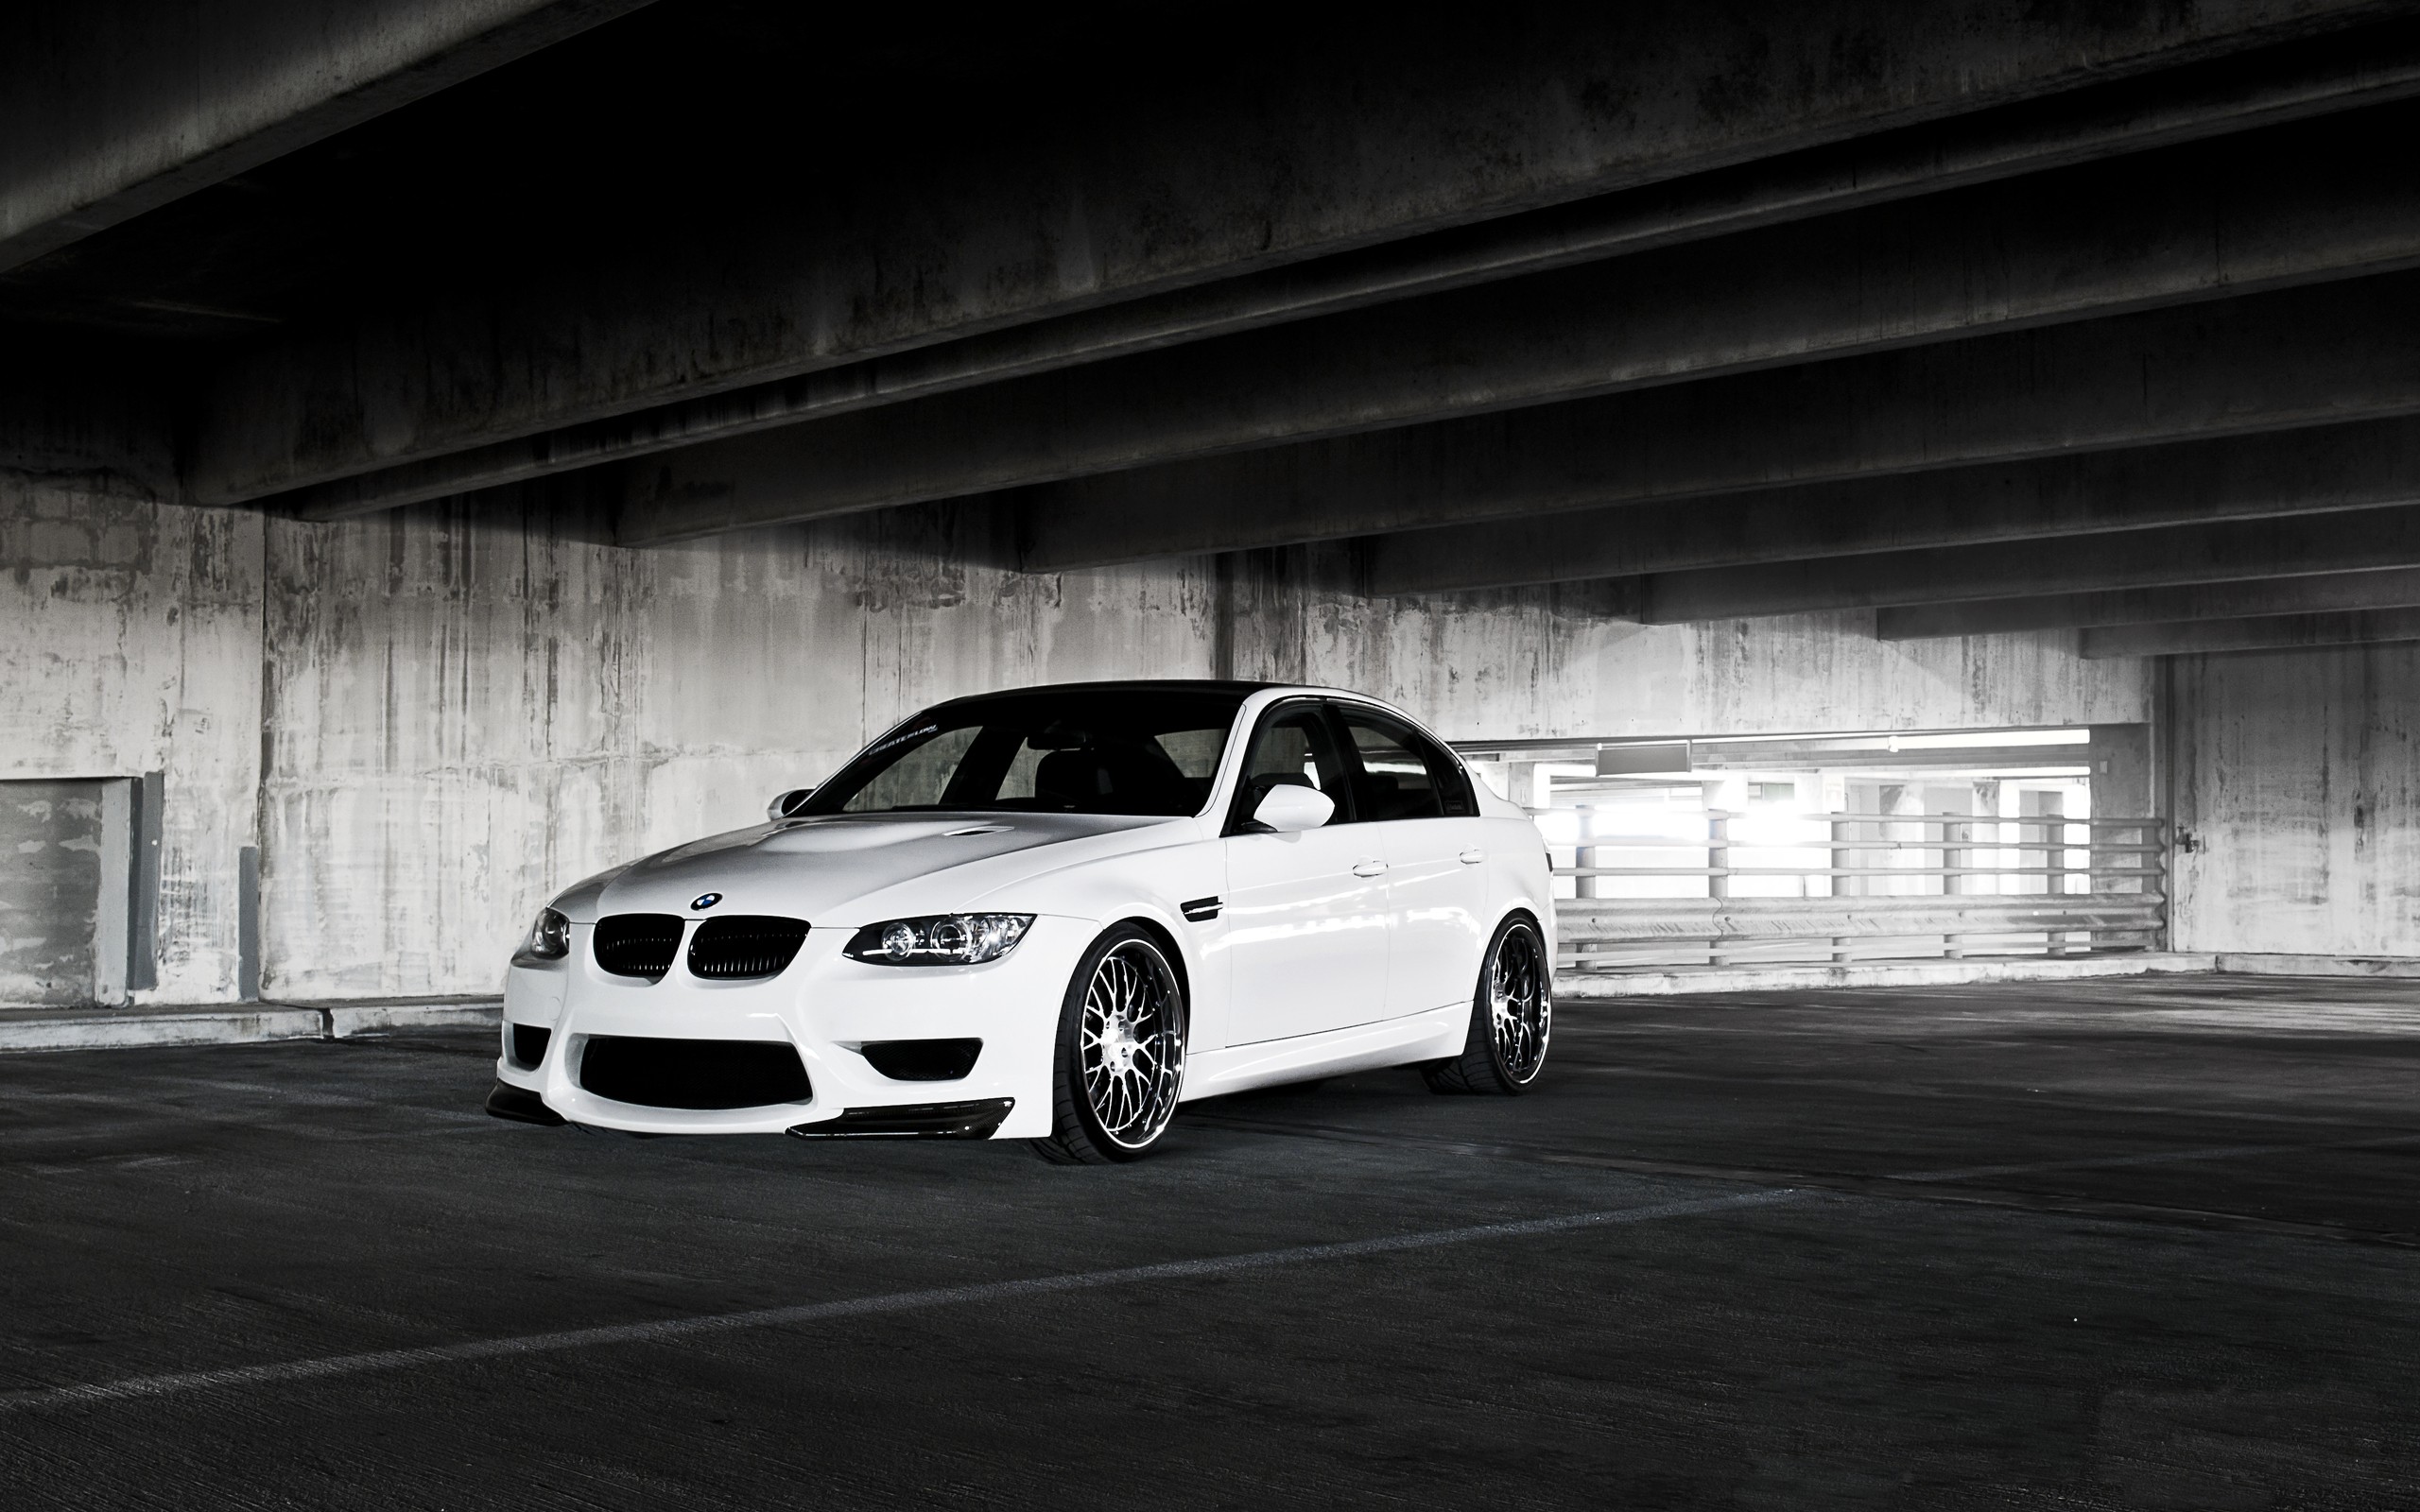 white, Cars, Vehicles, Supercars, Tuning, Wheels, Racing, Bmw, M3, Sports, Cars, Luxury, Sport, Cars, Speed, Automobiles Wallpaper